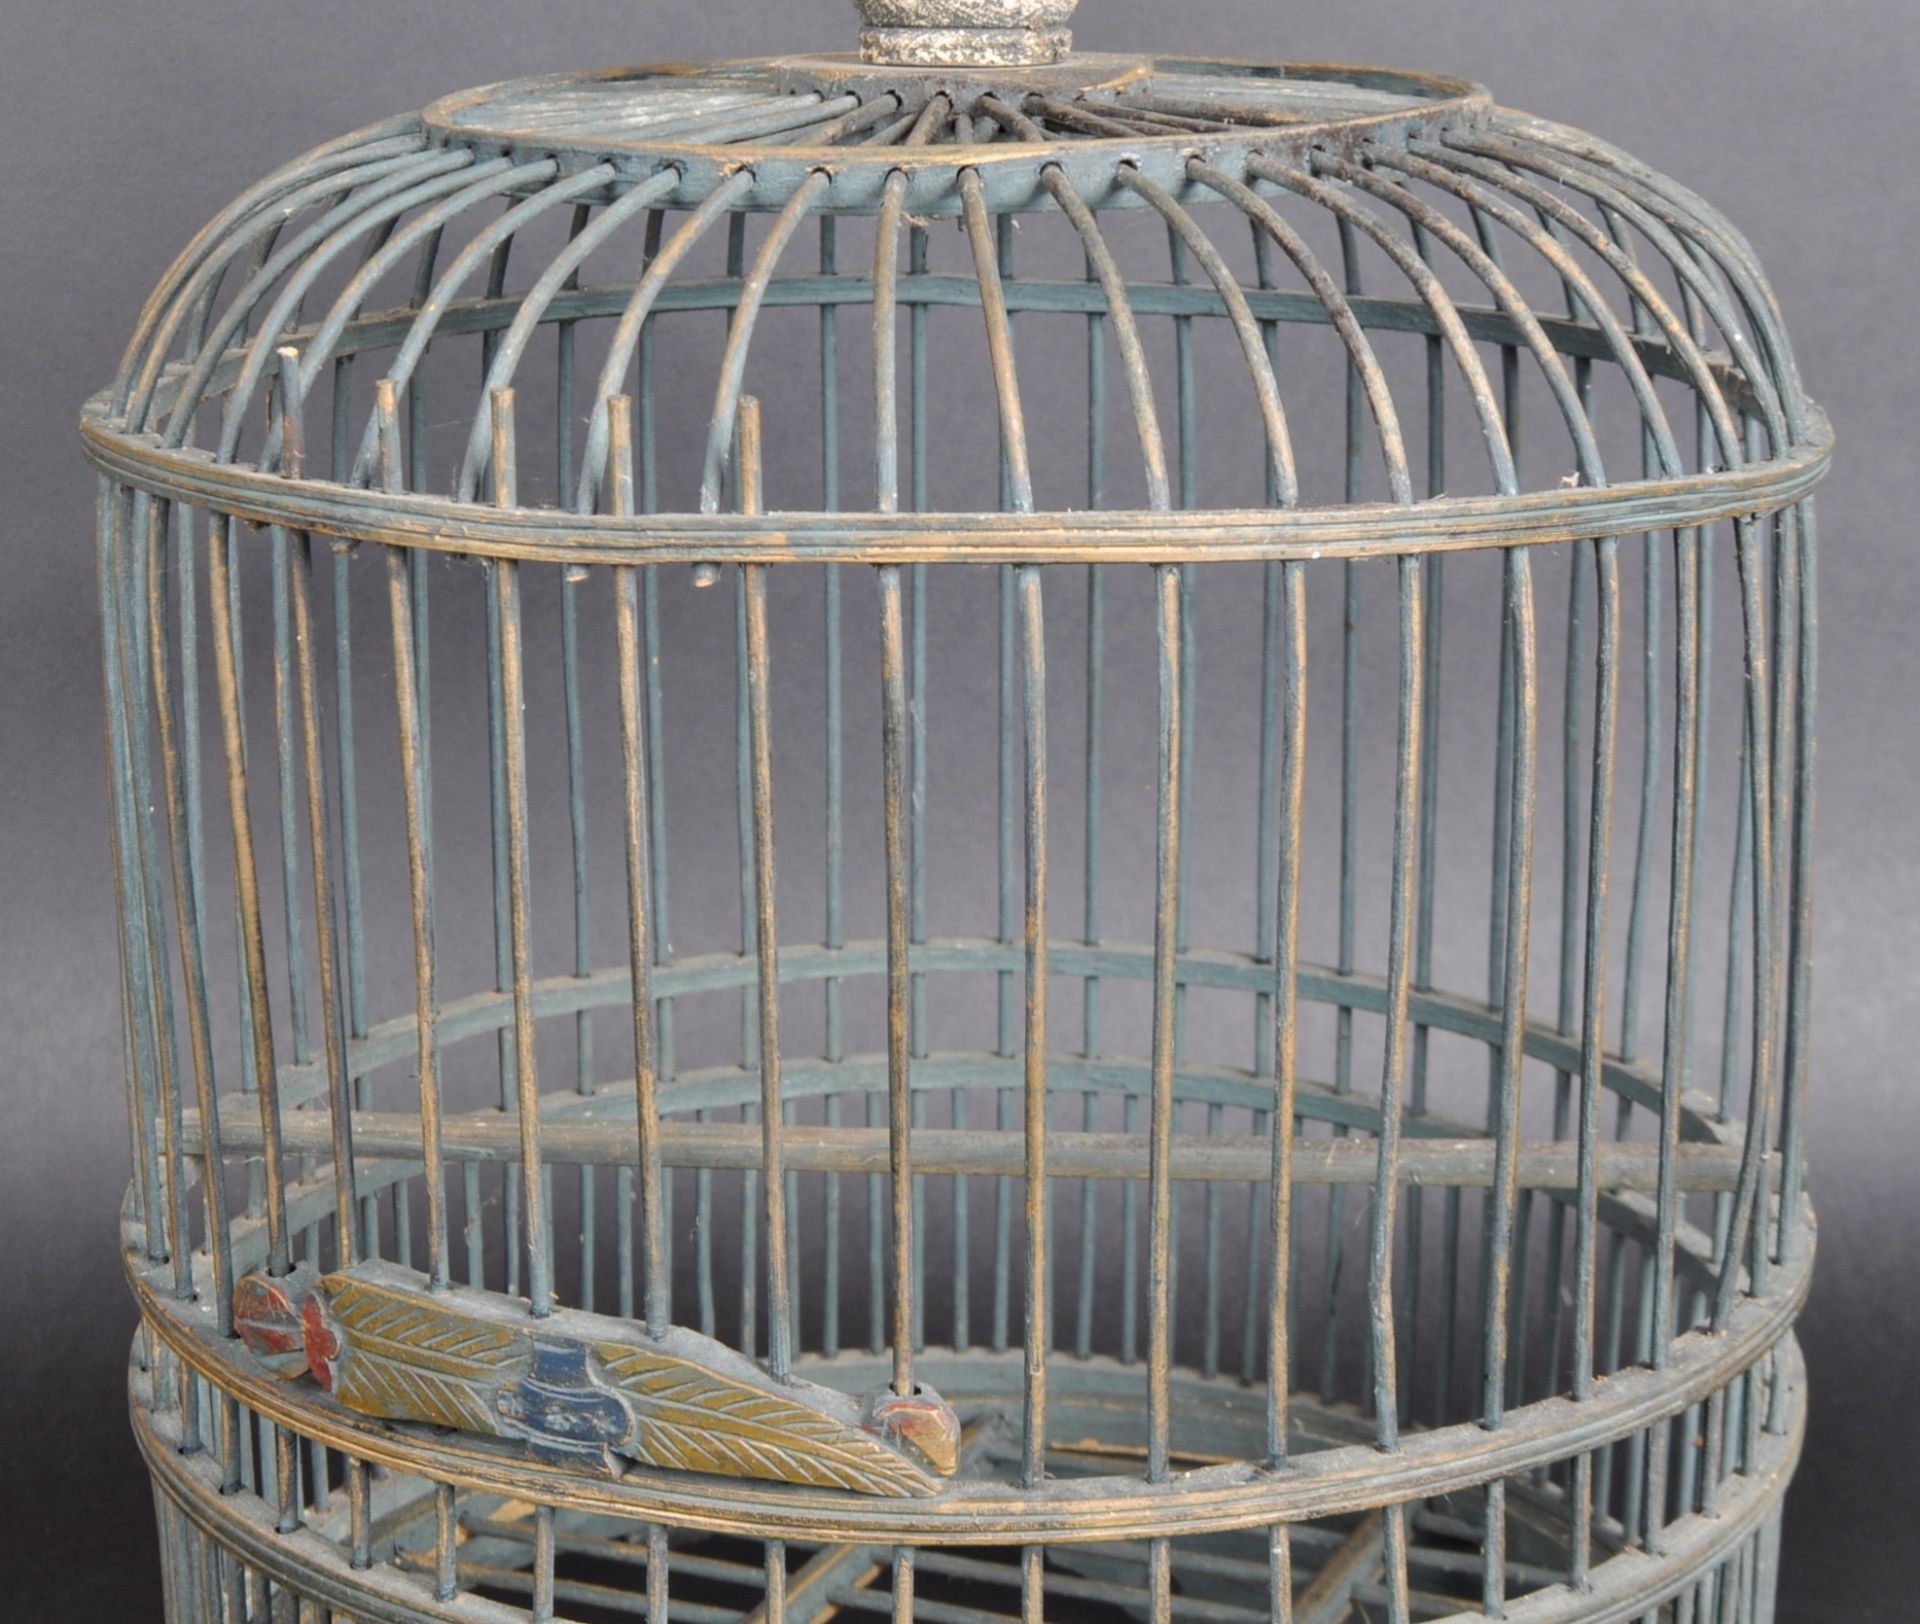 EARLY 20TH CENTURY CHINESE WOODEN BIRDCAGE - Image 4 of 6